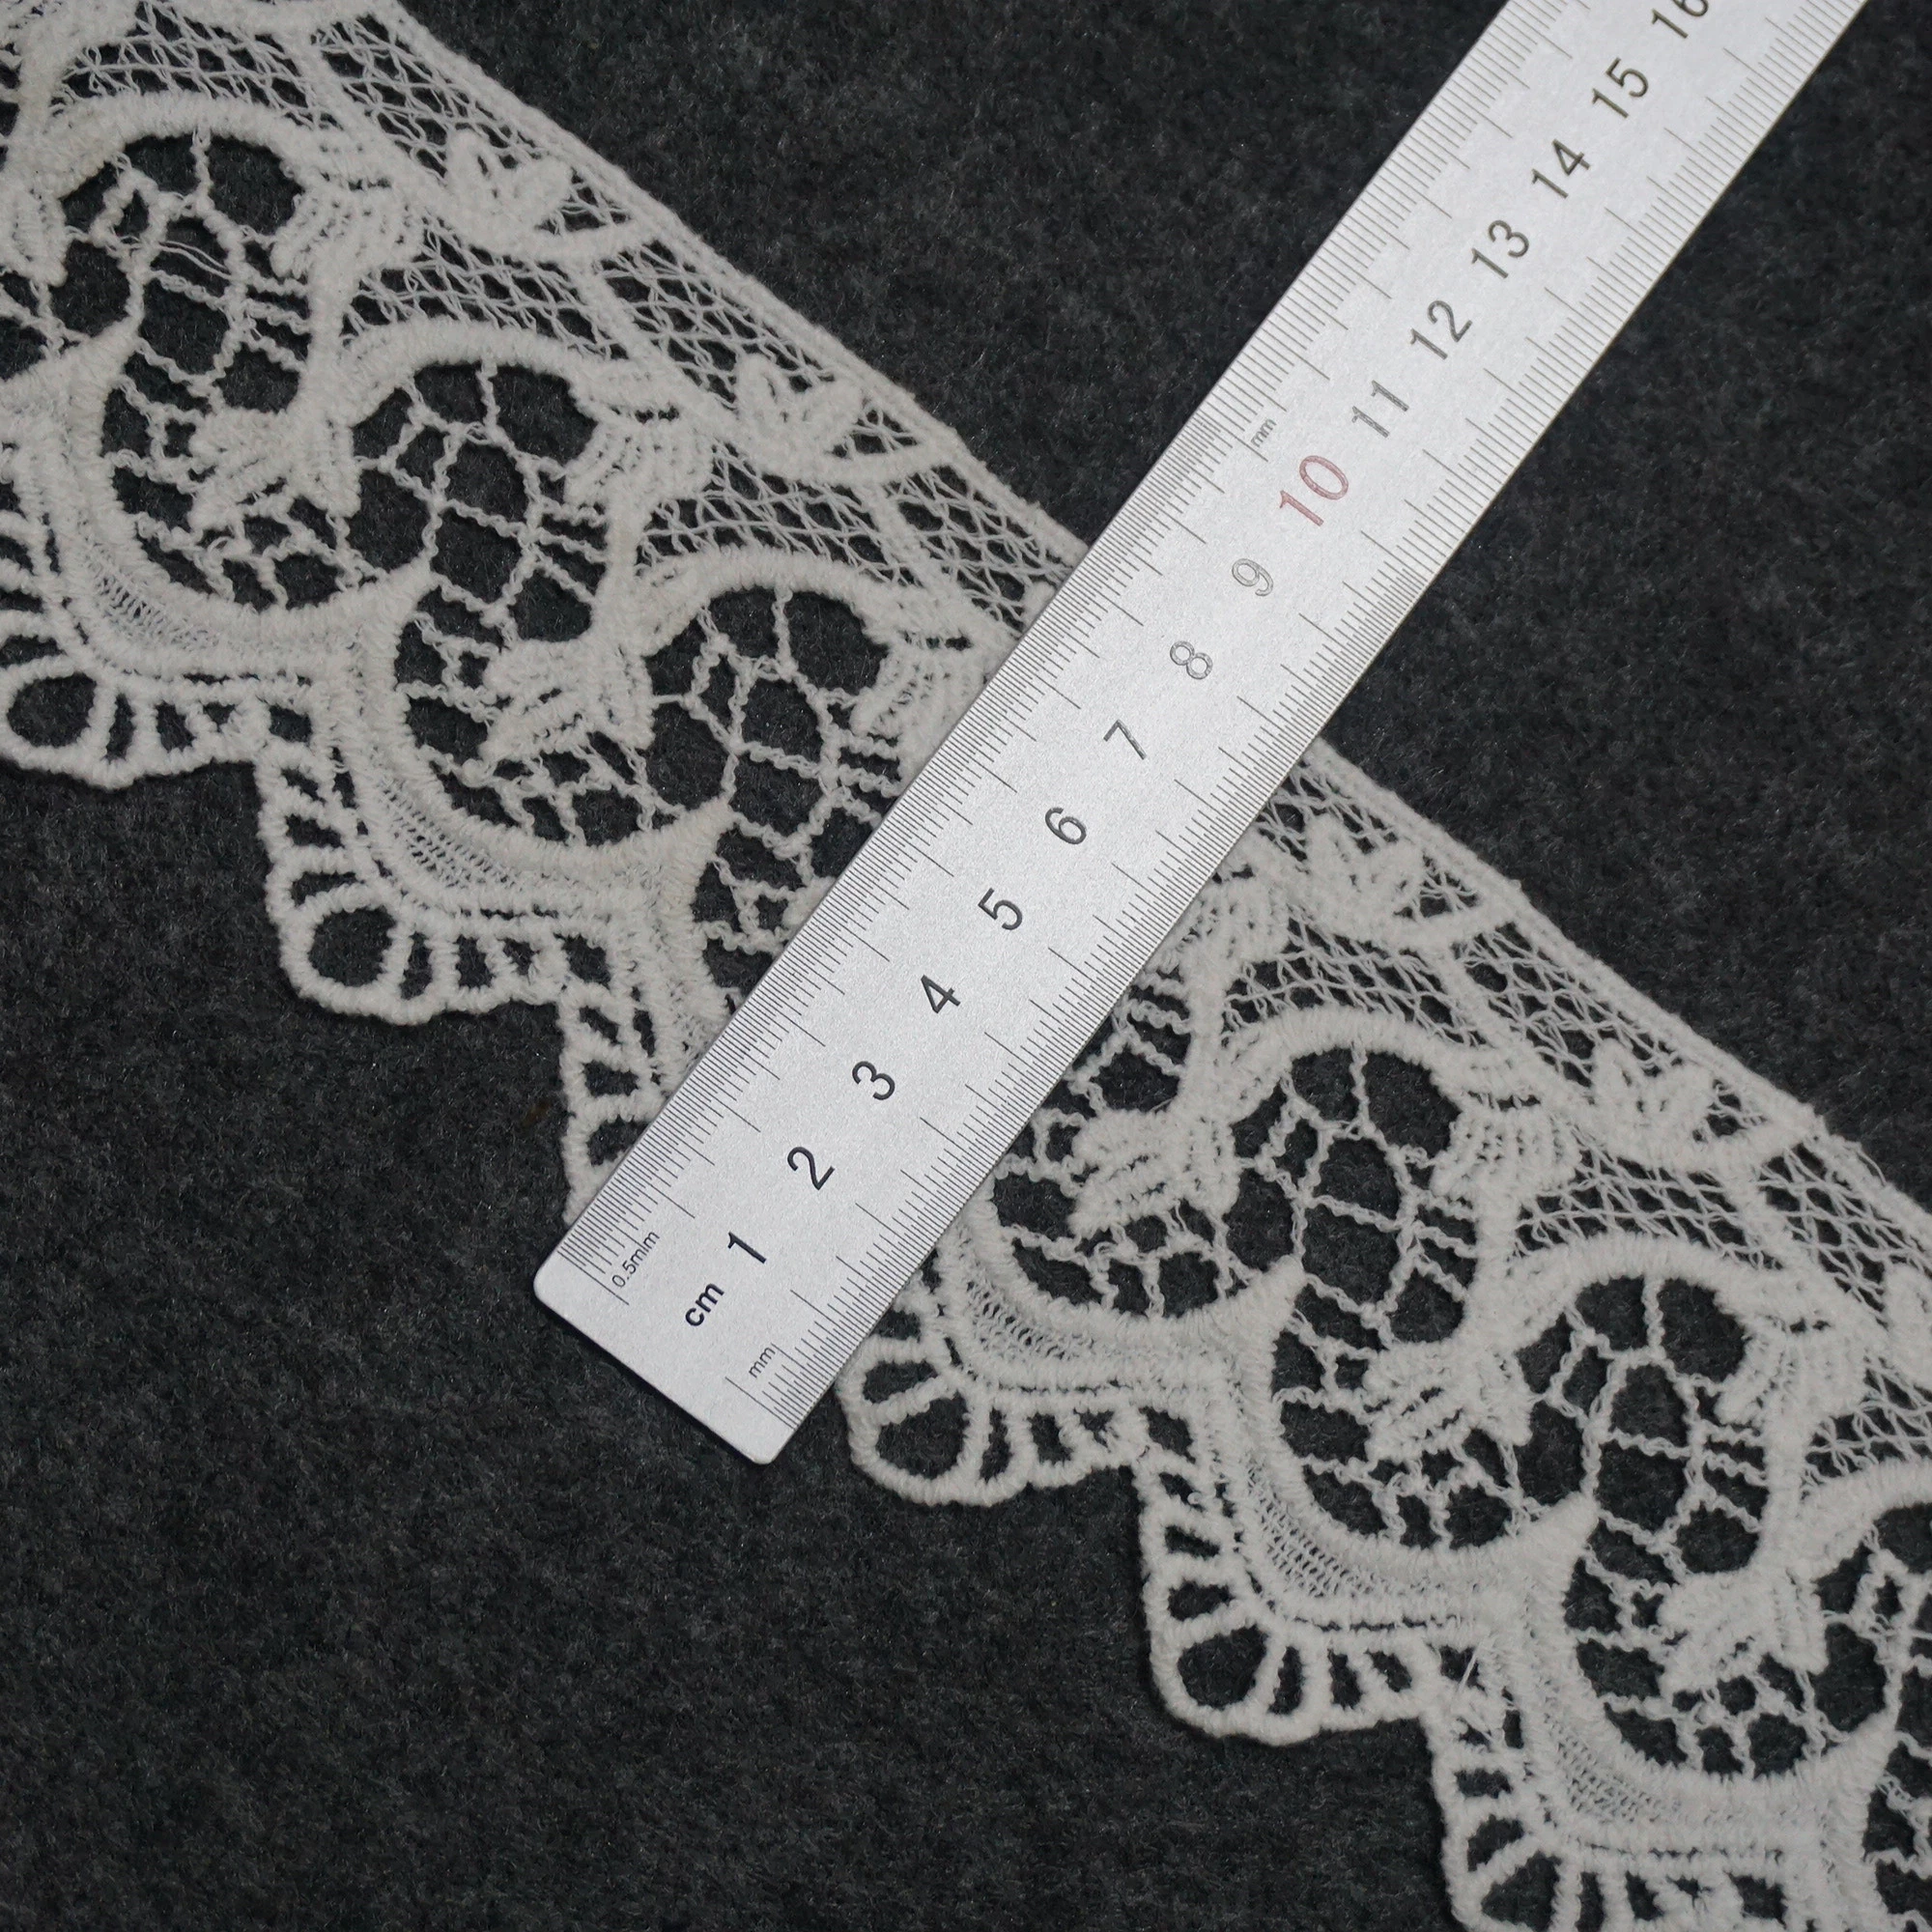 Guangzhou lace antique style cotton venice lace trim embroidered scalloped bridal veil trim lace by yards